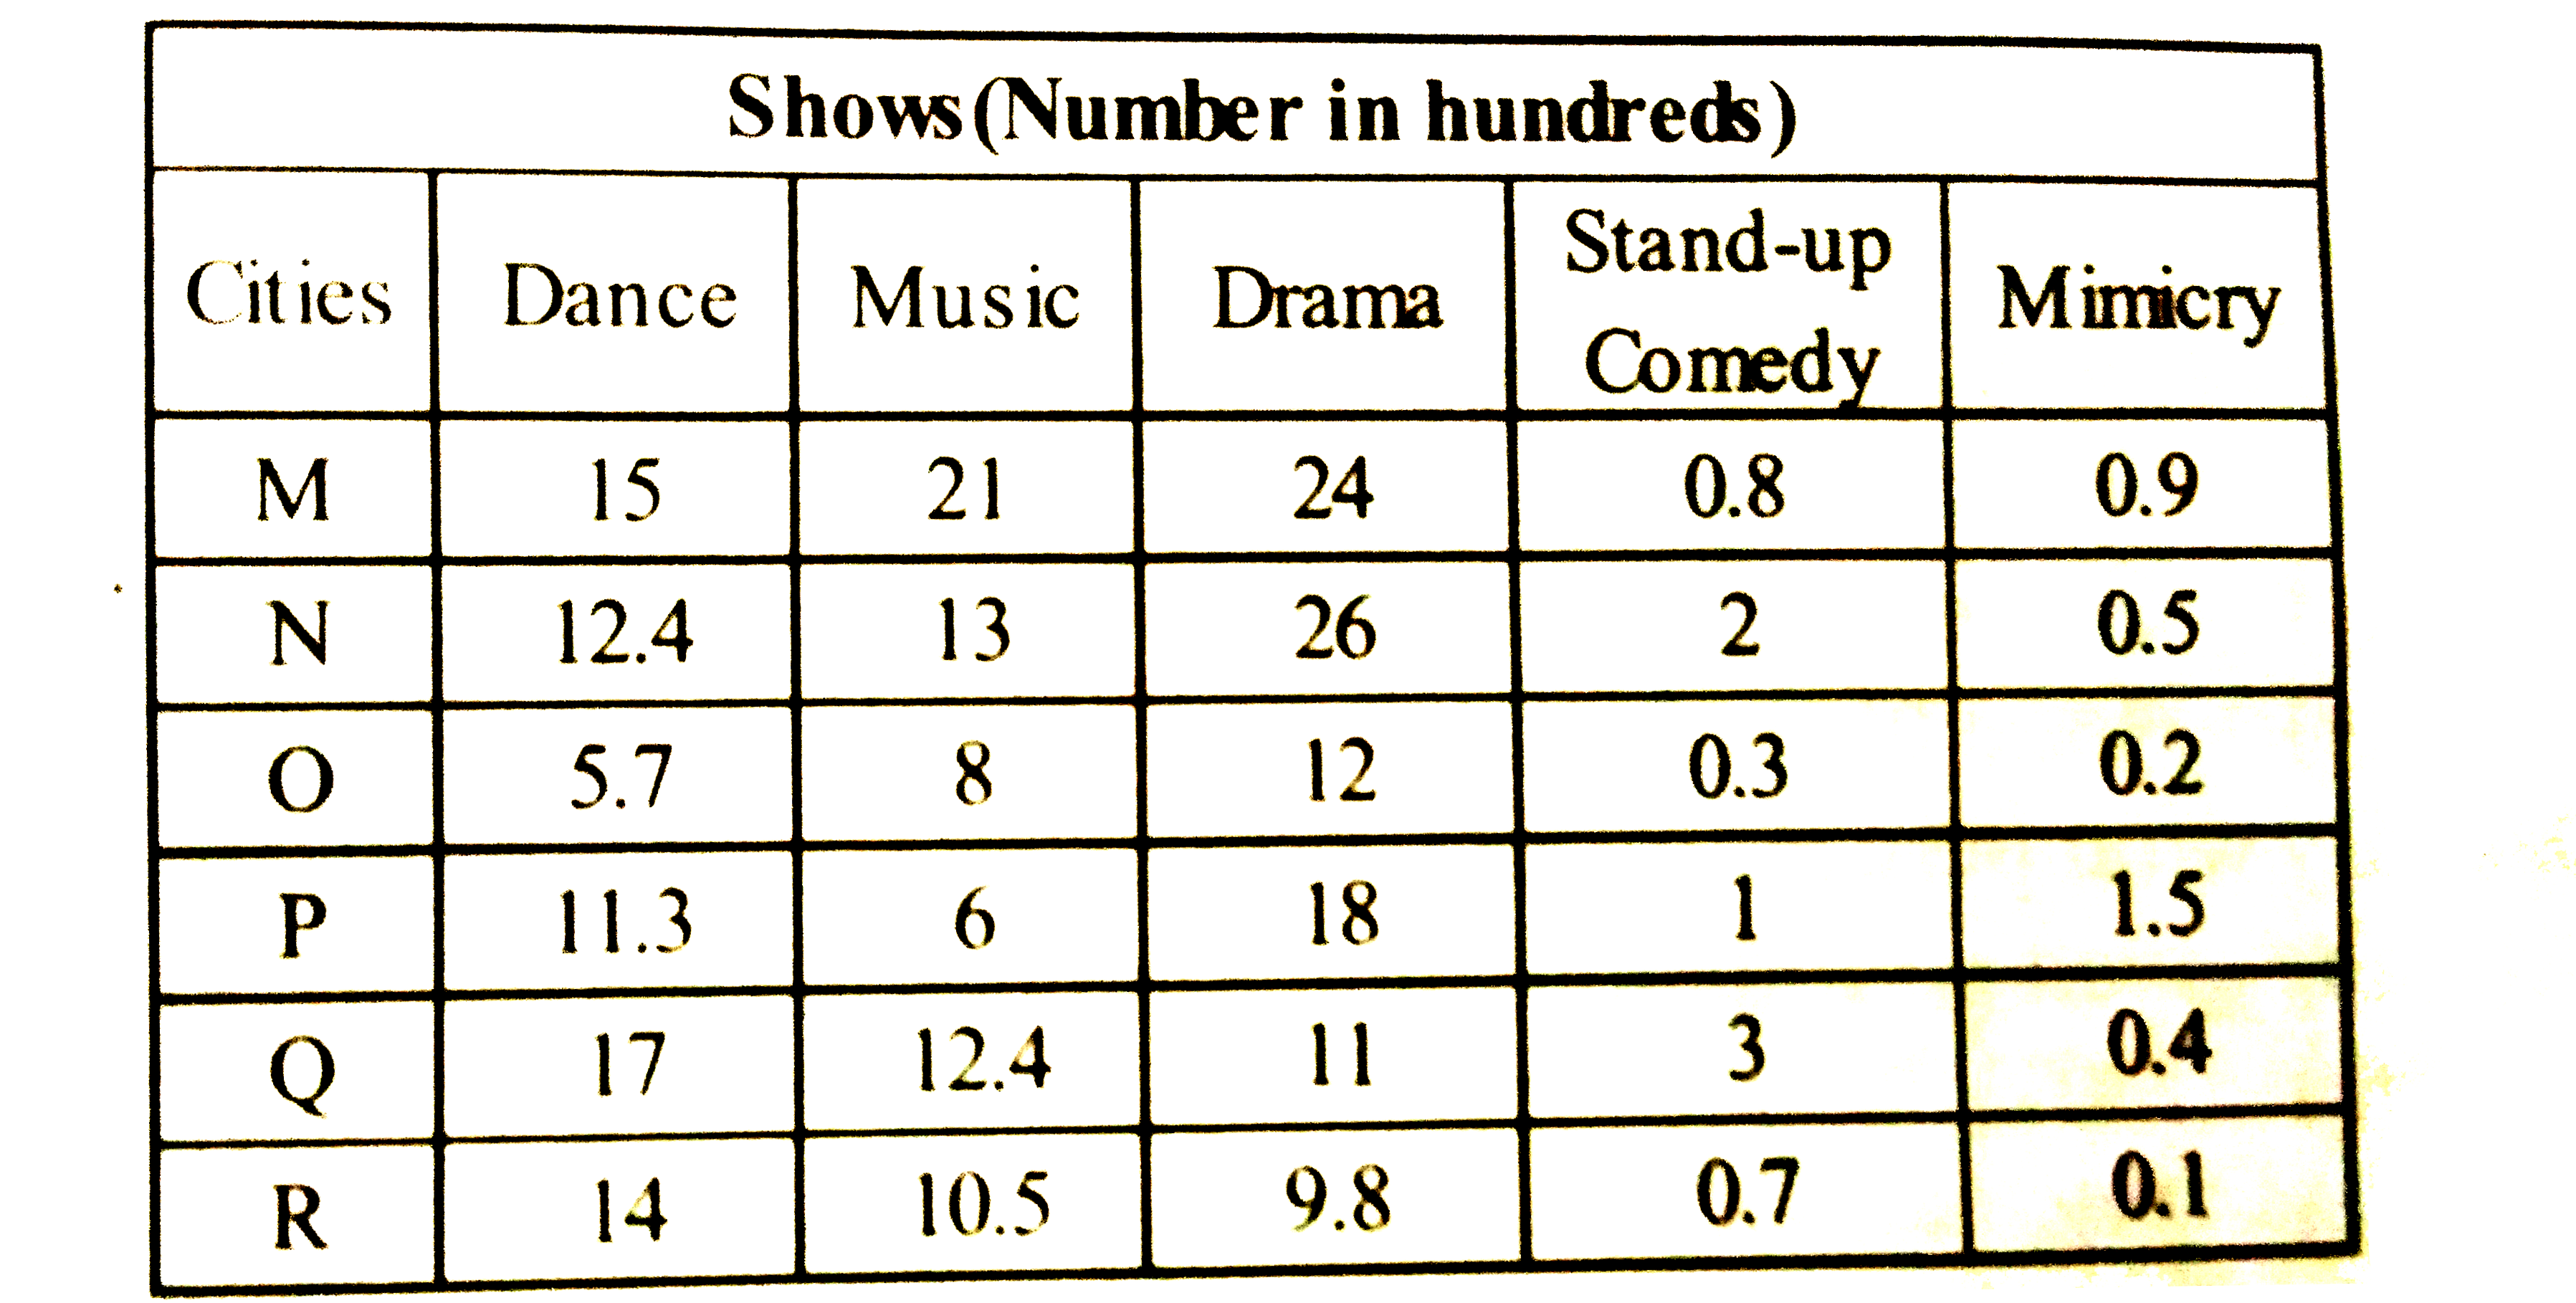 What is the total number of stand-up comedy shows held in all the cites together ?